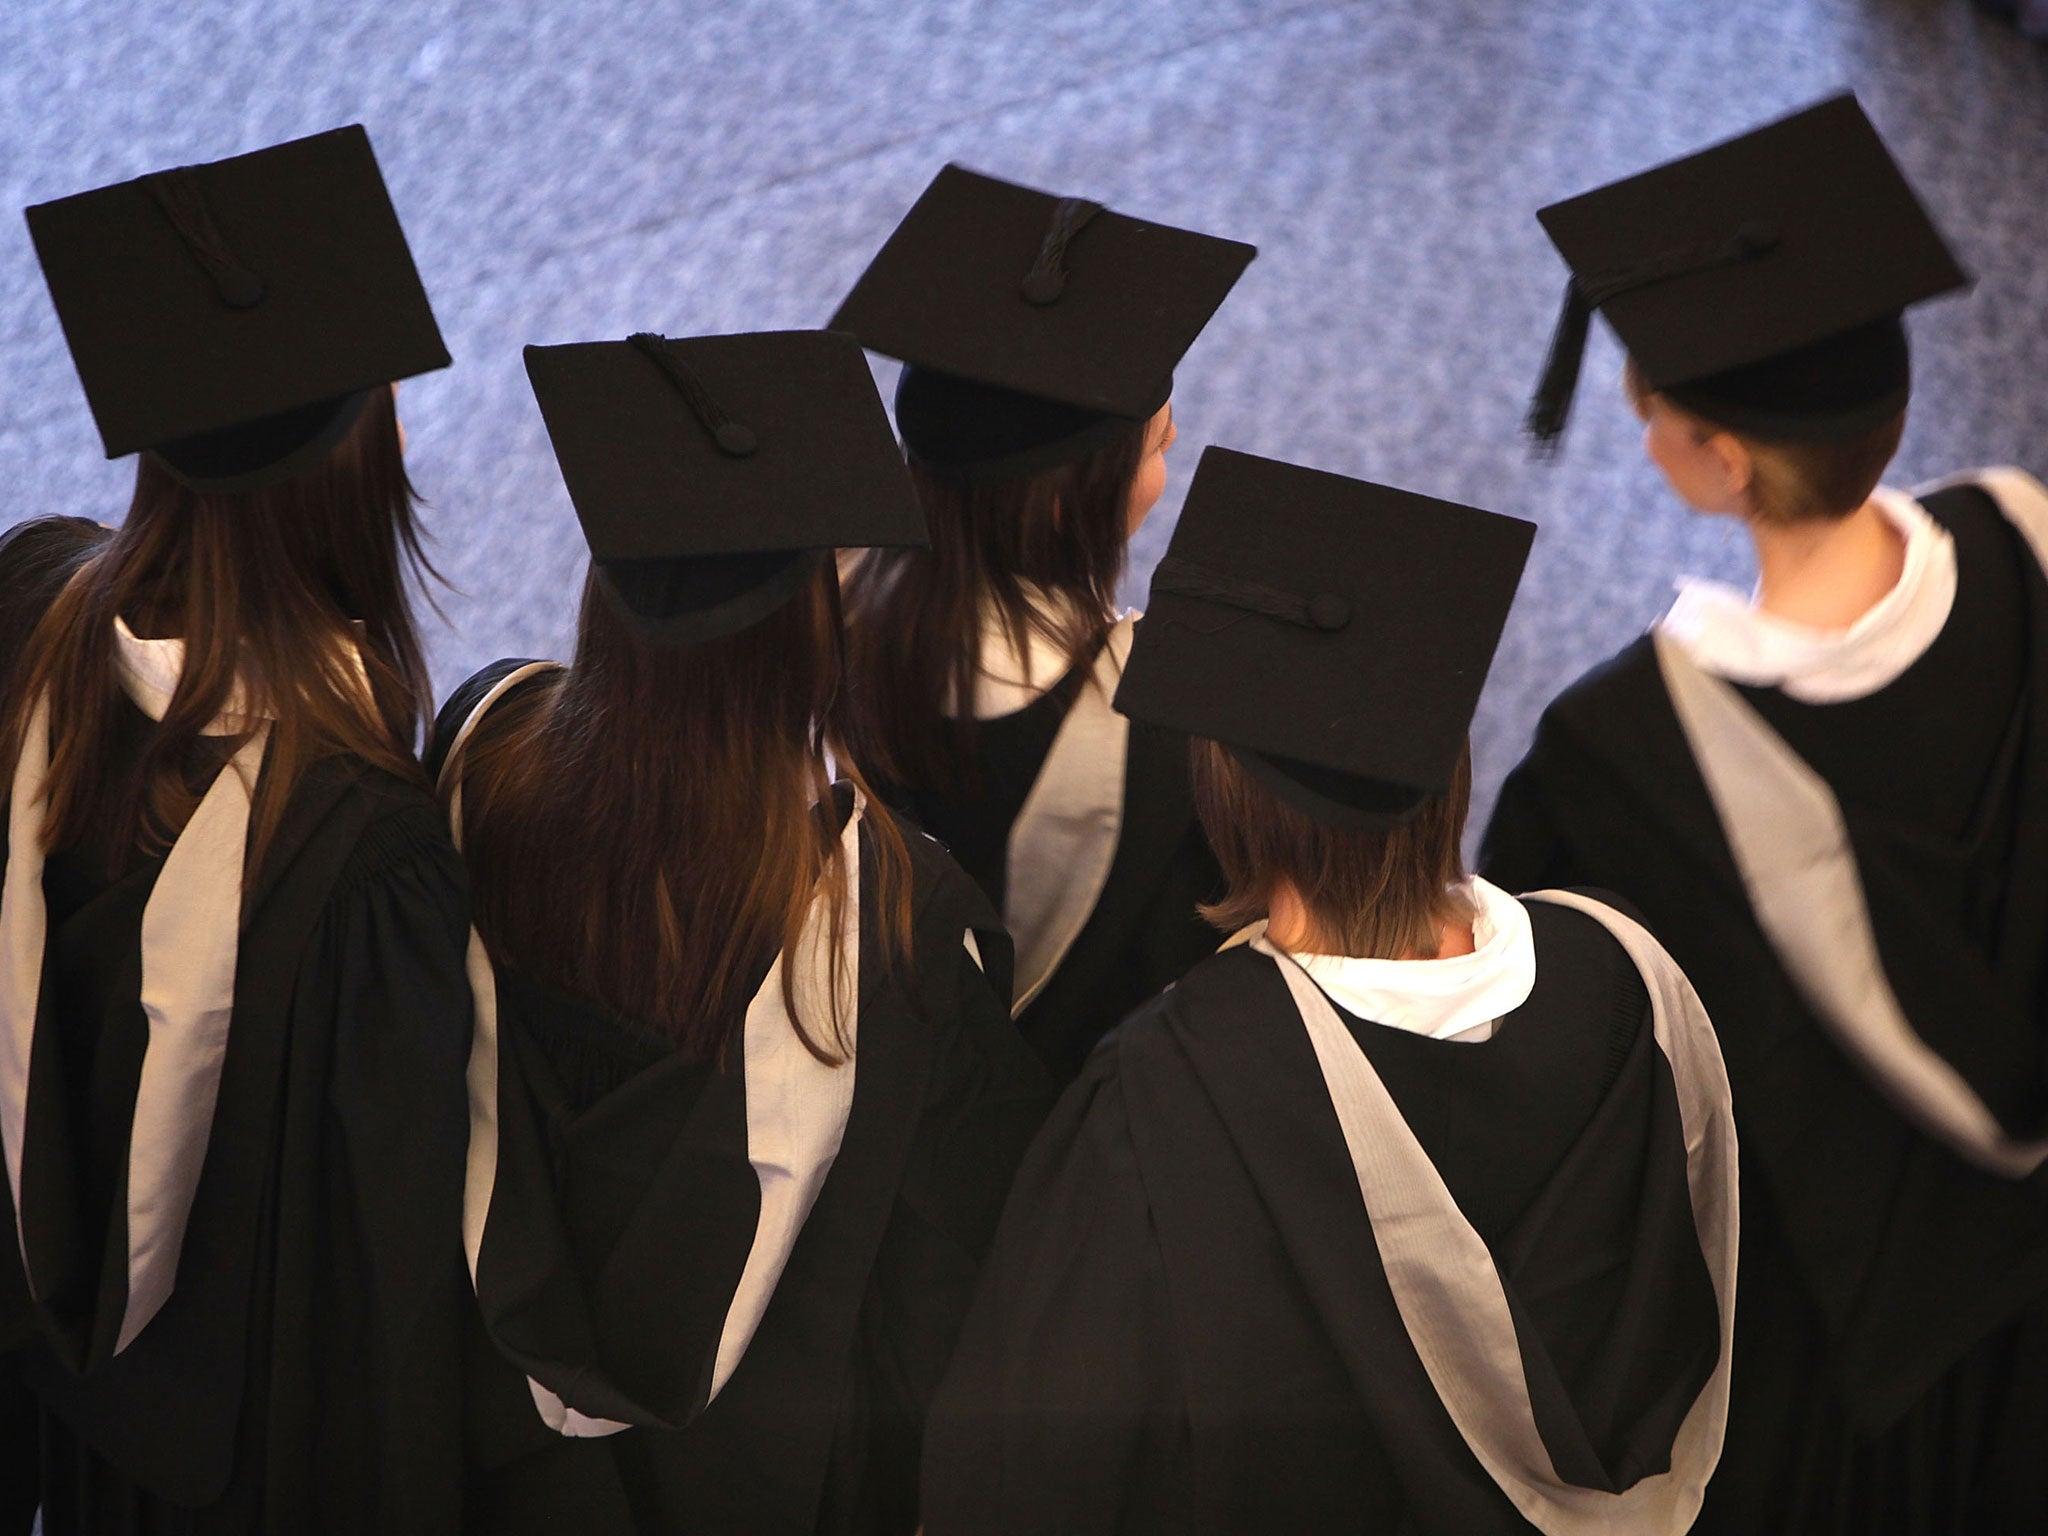 Women are more likely than men to go to university